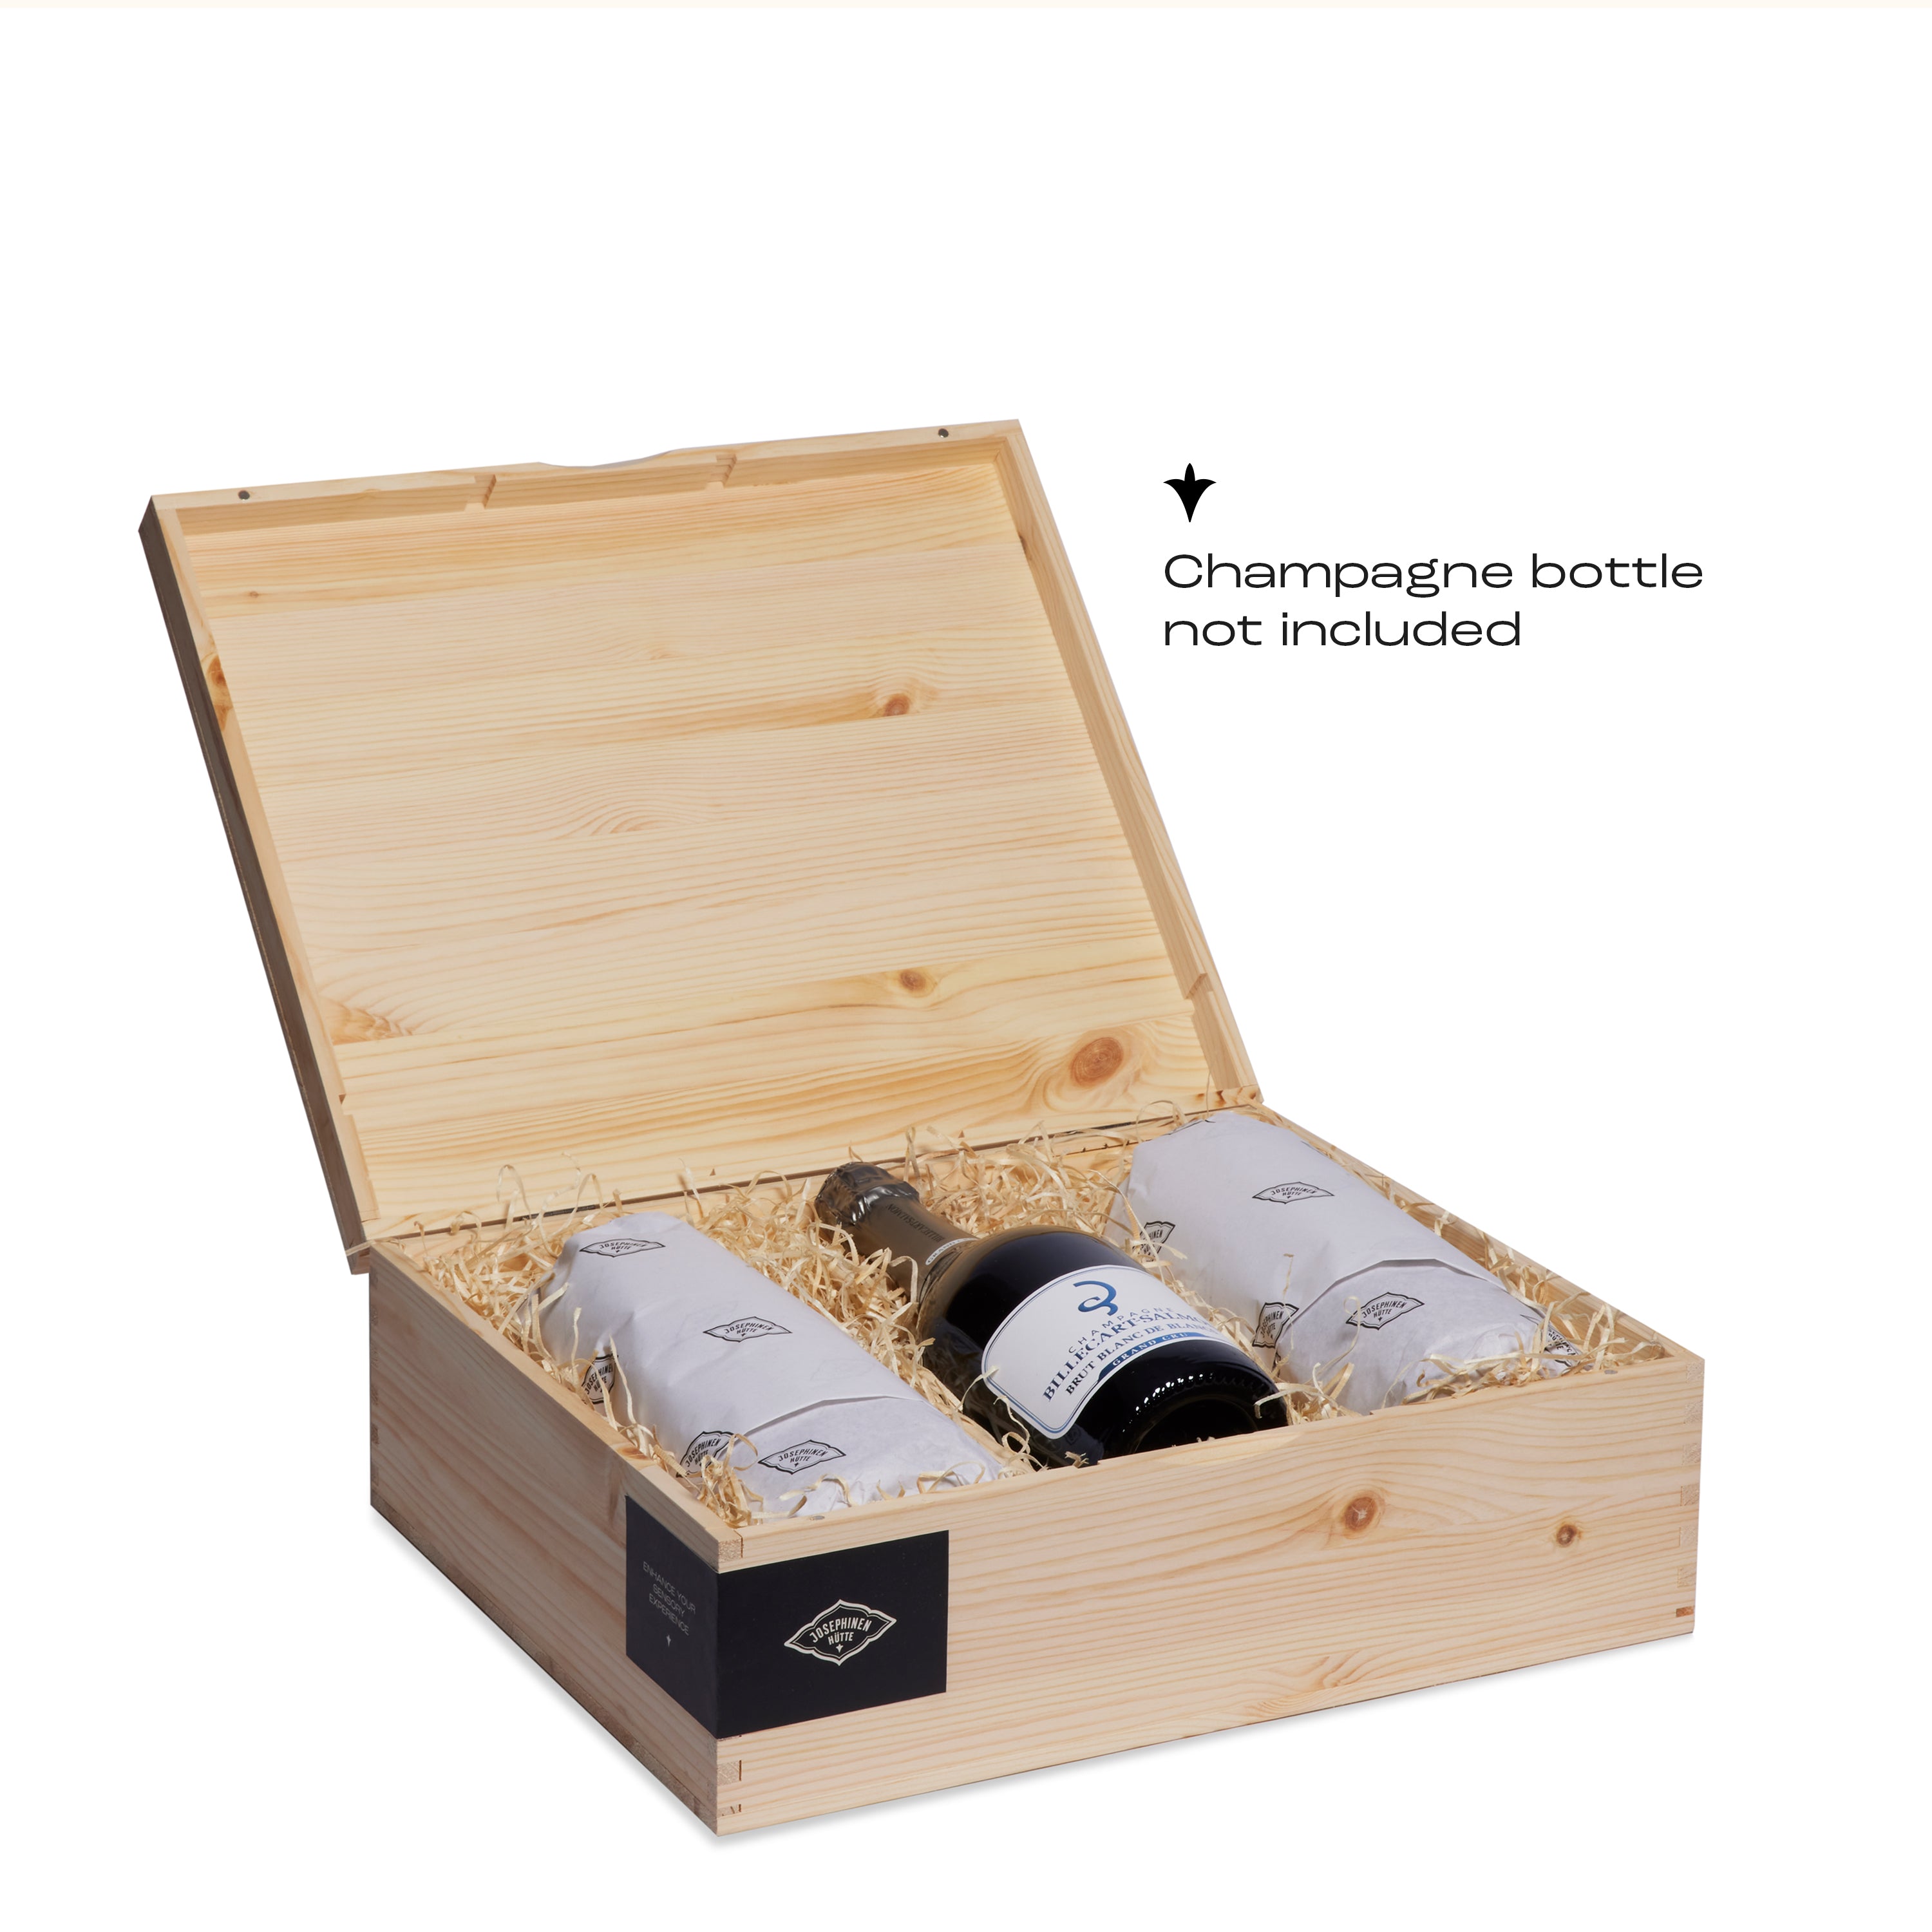 Inside the Josephinenhütte wedding gift box, featuring a beautifully packed wooden box with two JOSEPHINE No 4 champagne glasses and space for a bottle. Note: the champagne bottle is not included.